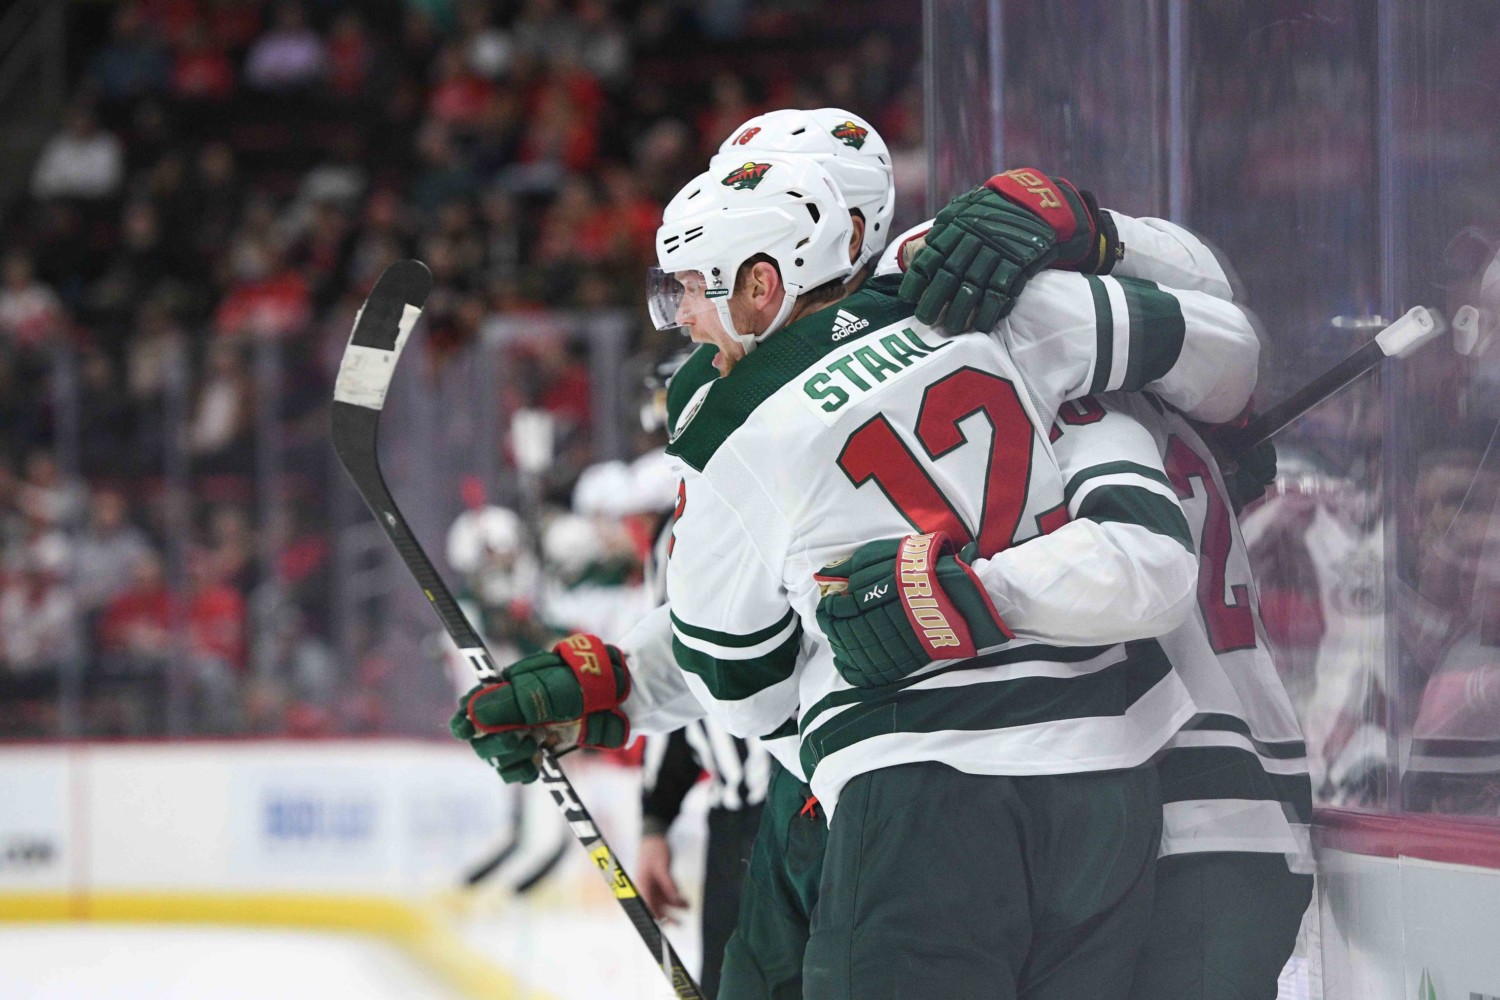 Scouting the Minnesota Wild and Detroit Red Wings